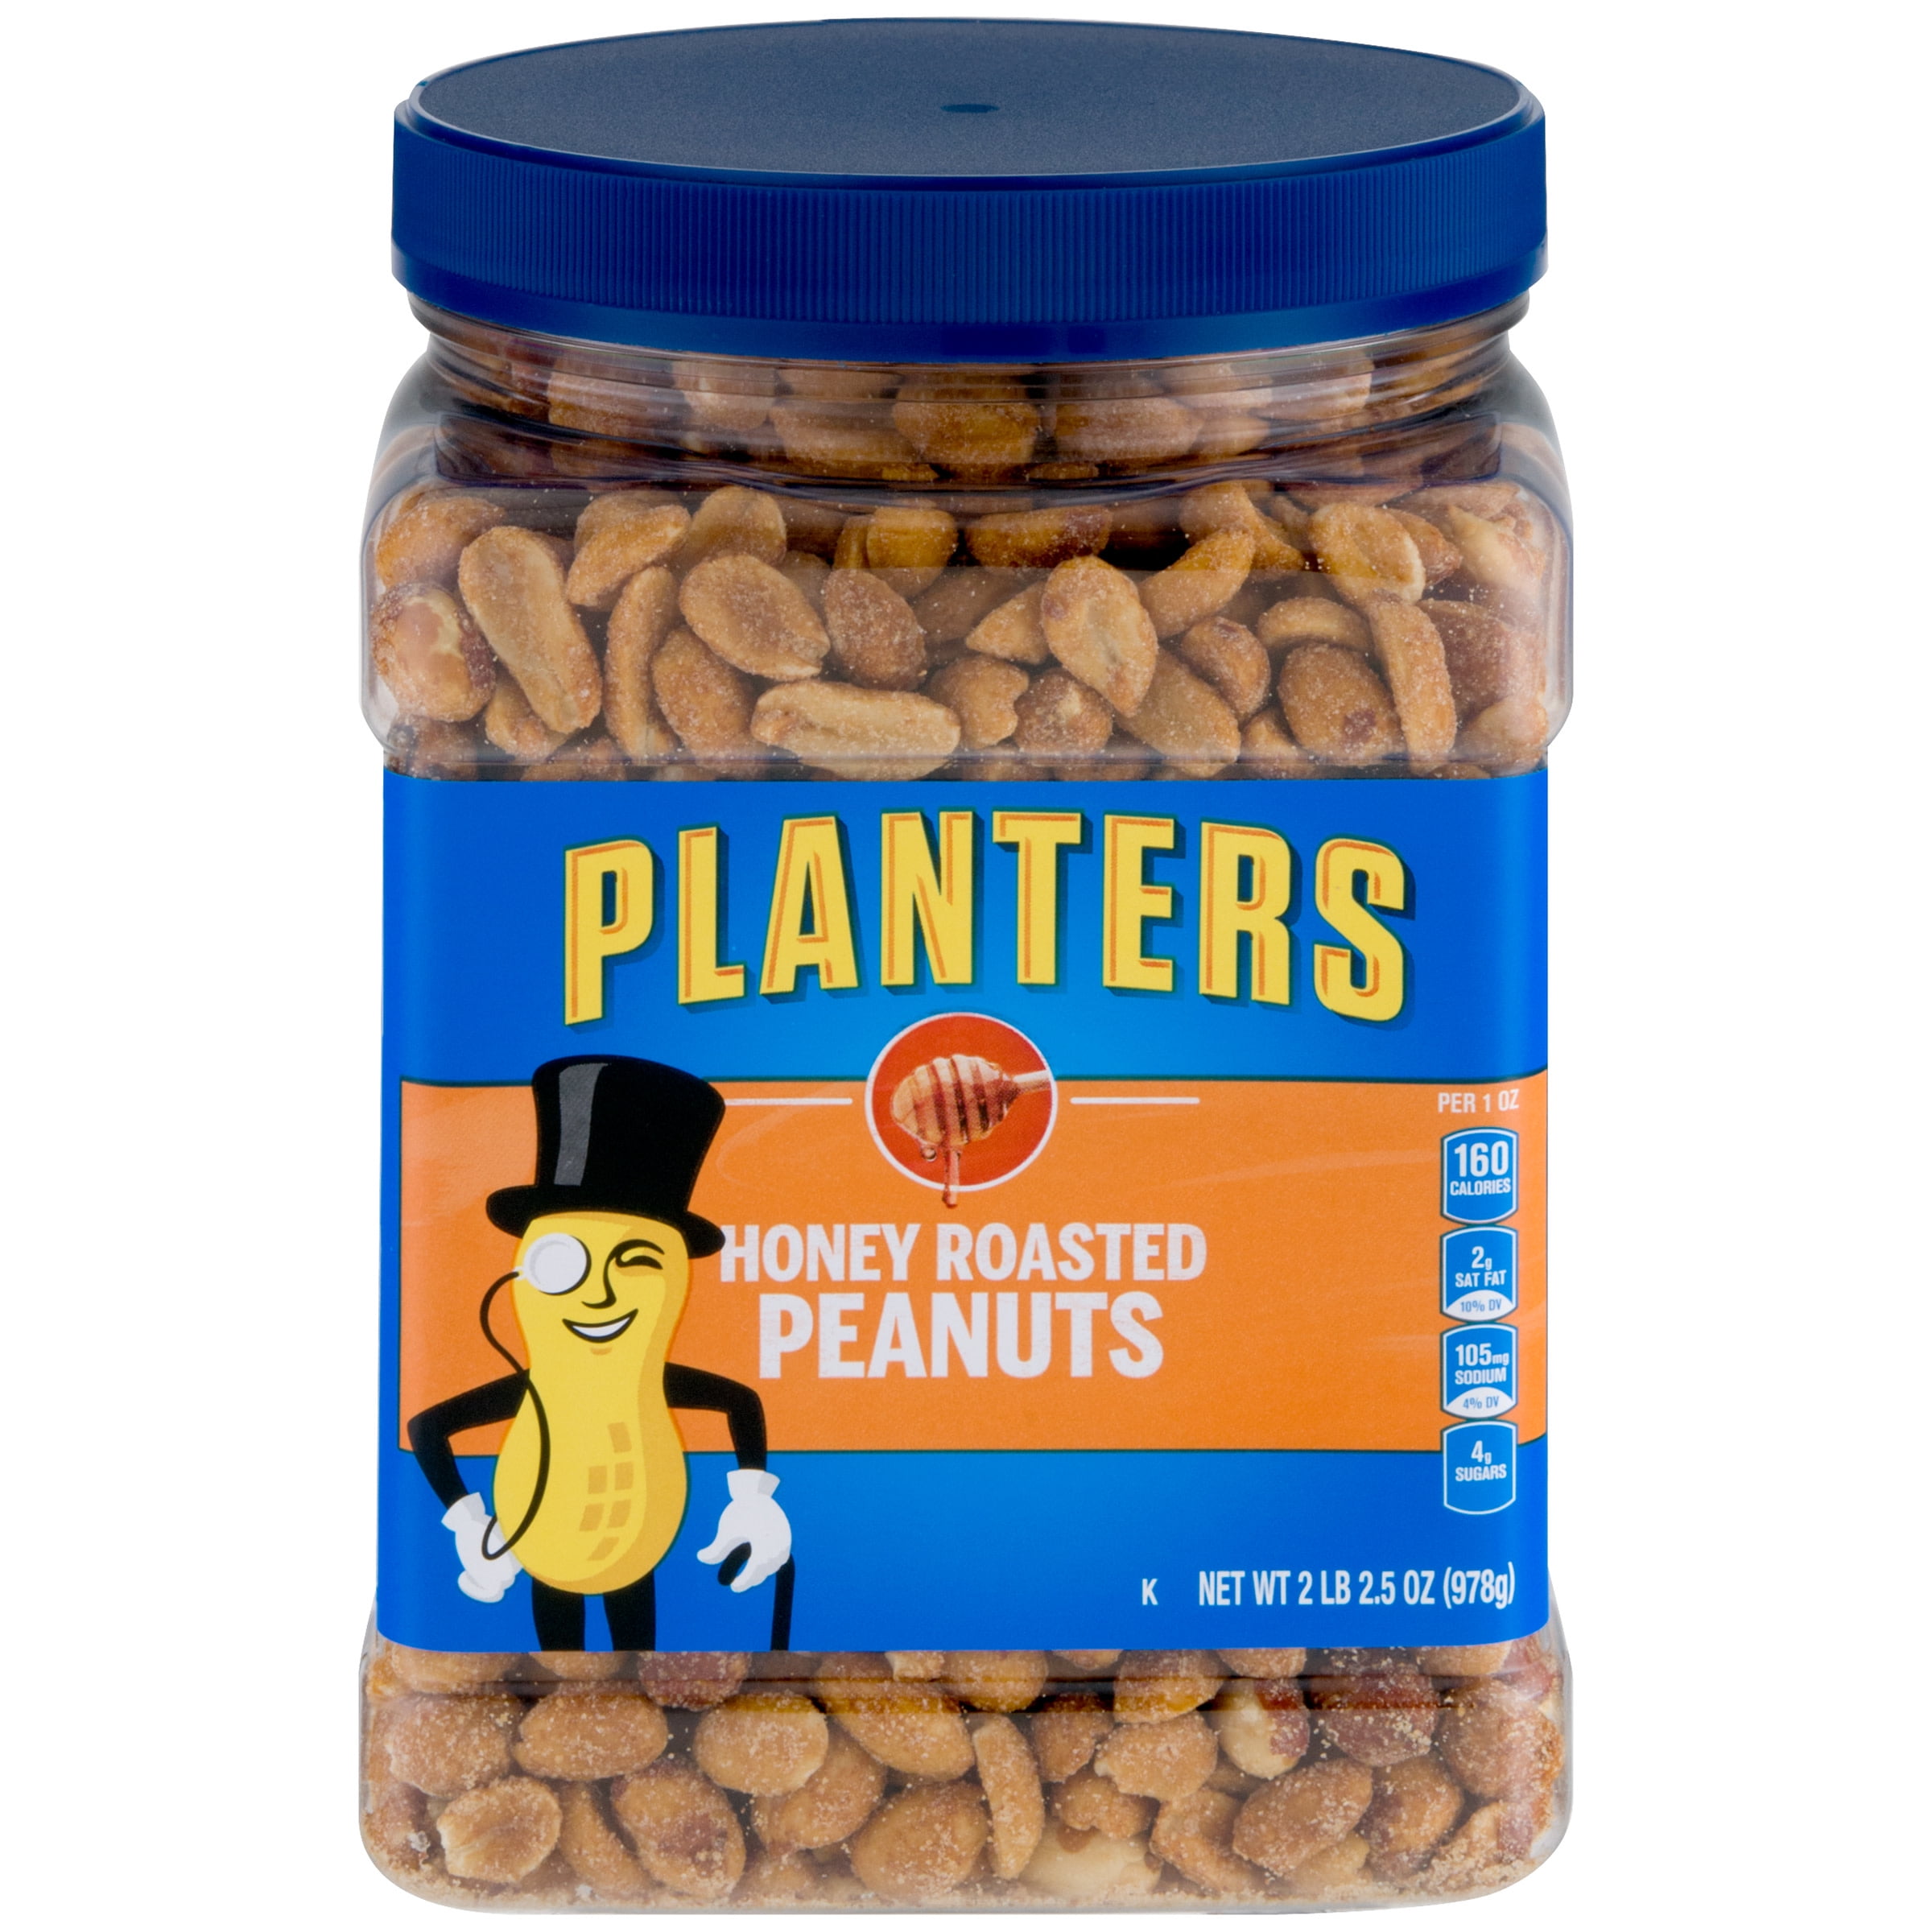 Planters Honey Roasted Peanuts, 2.16 lb Container